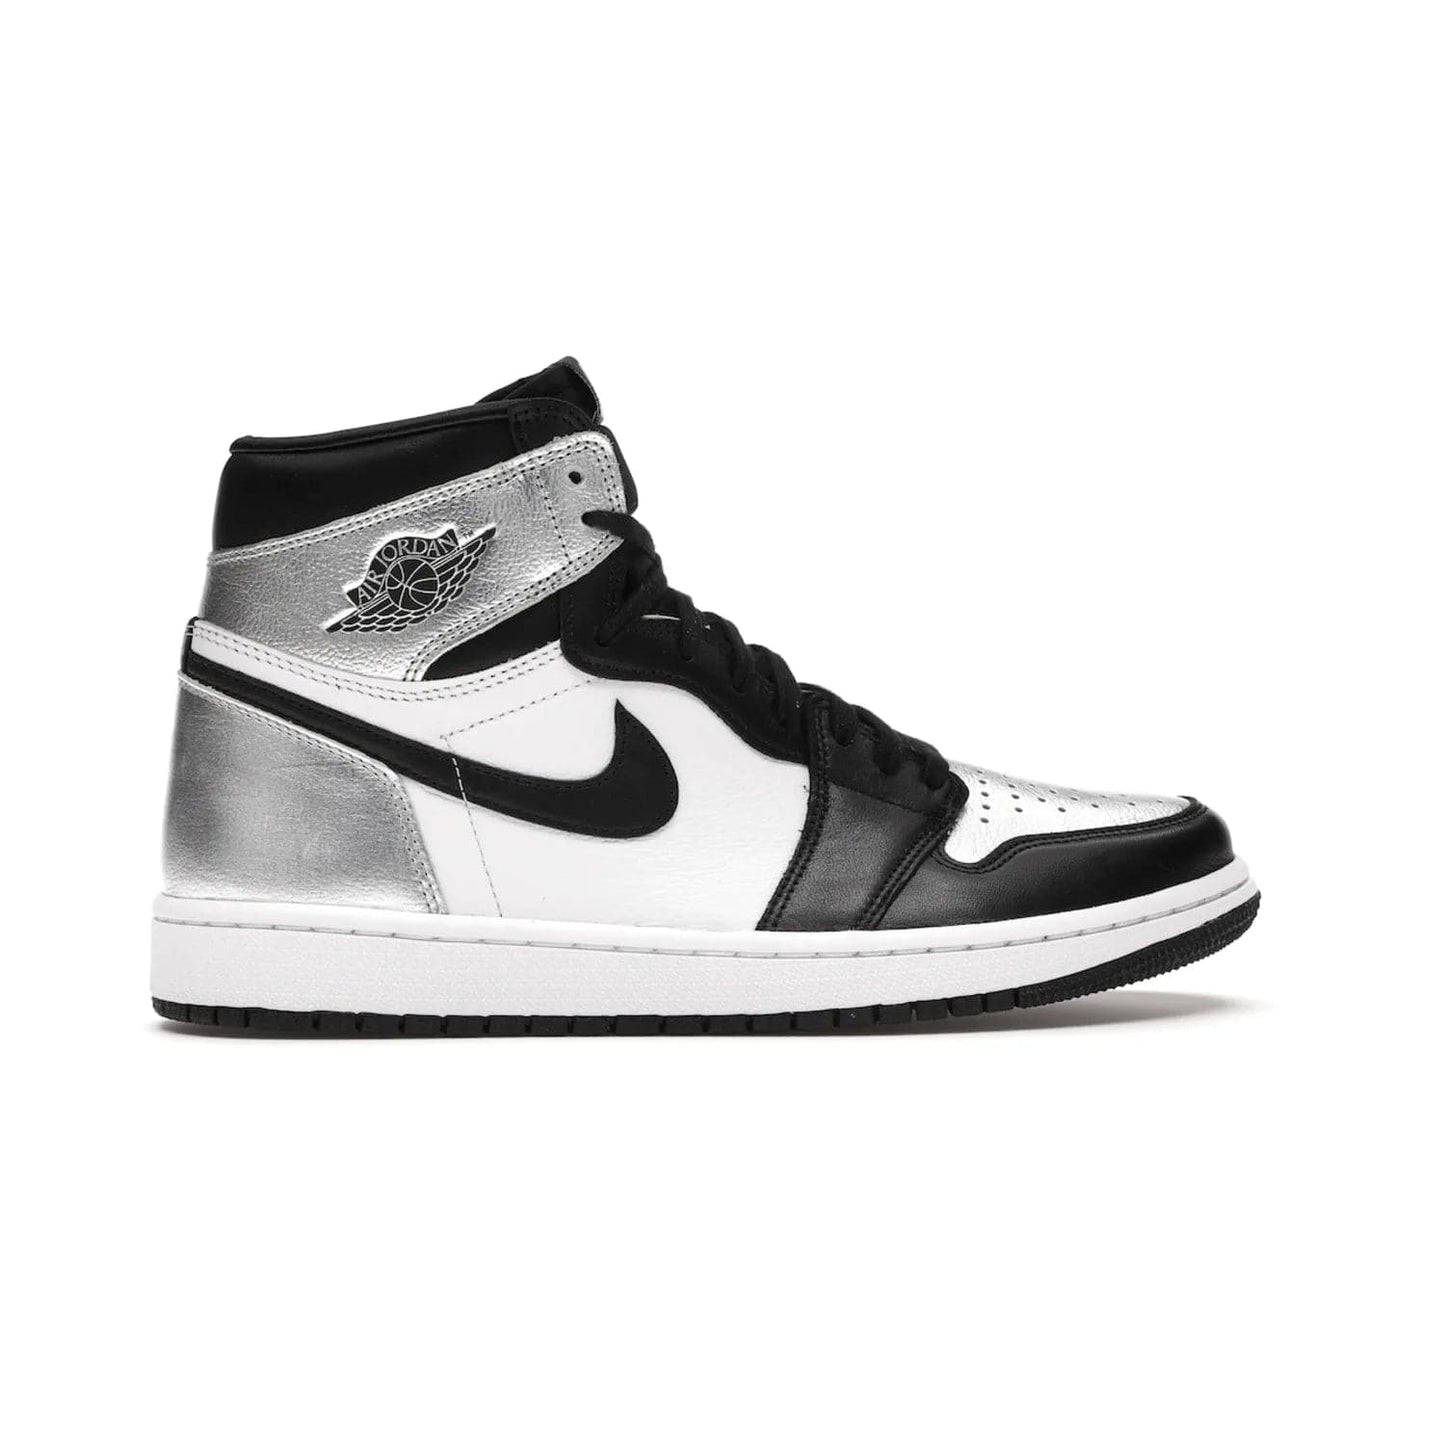 Jordan 1 Retro High Silver Toe (Women's) - Image 36 - Only at www.BallersClubKickz.com - Introducing the Jordan 1 Retro High Silver Toe (Women's): an updated spin on the iconic 'Black Toe' theme. Featuring white & black leather and silver patent leather construction. Nike Air branding, Air Jordan Wings logo, and white/black sole finish give a classic look. The perfect addition to an on-trend streetwear look. Available in classic black & white, this Jordan 1 is an instant classic. Released in February 20